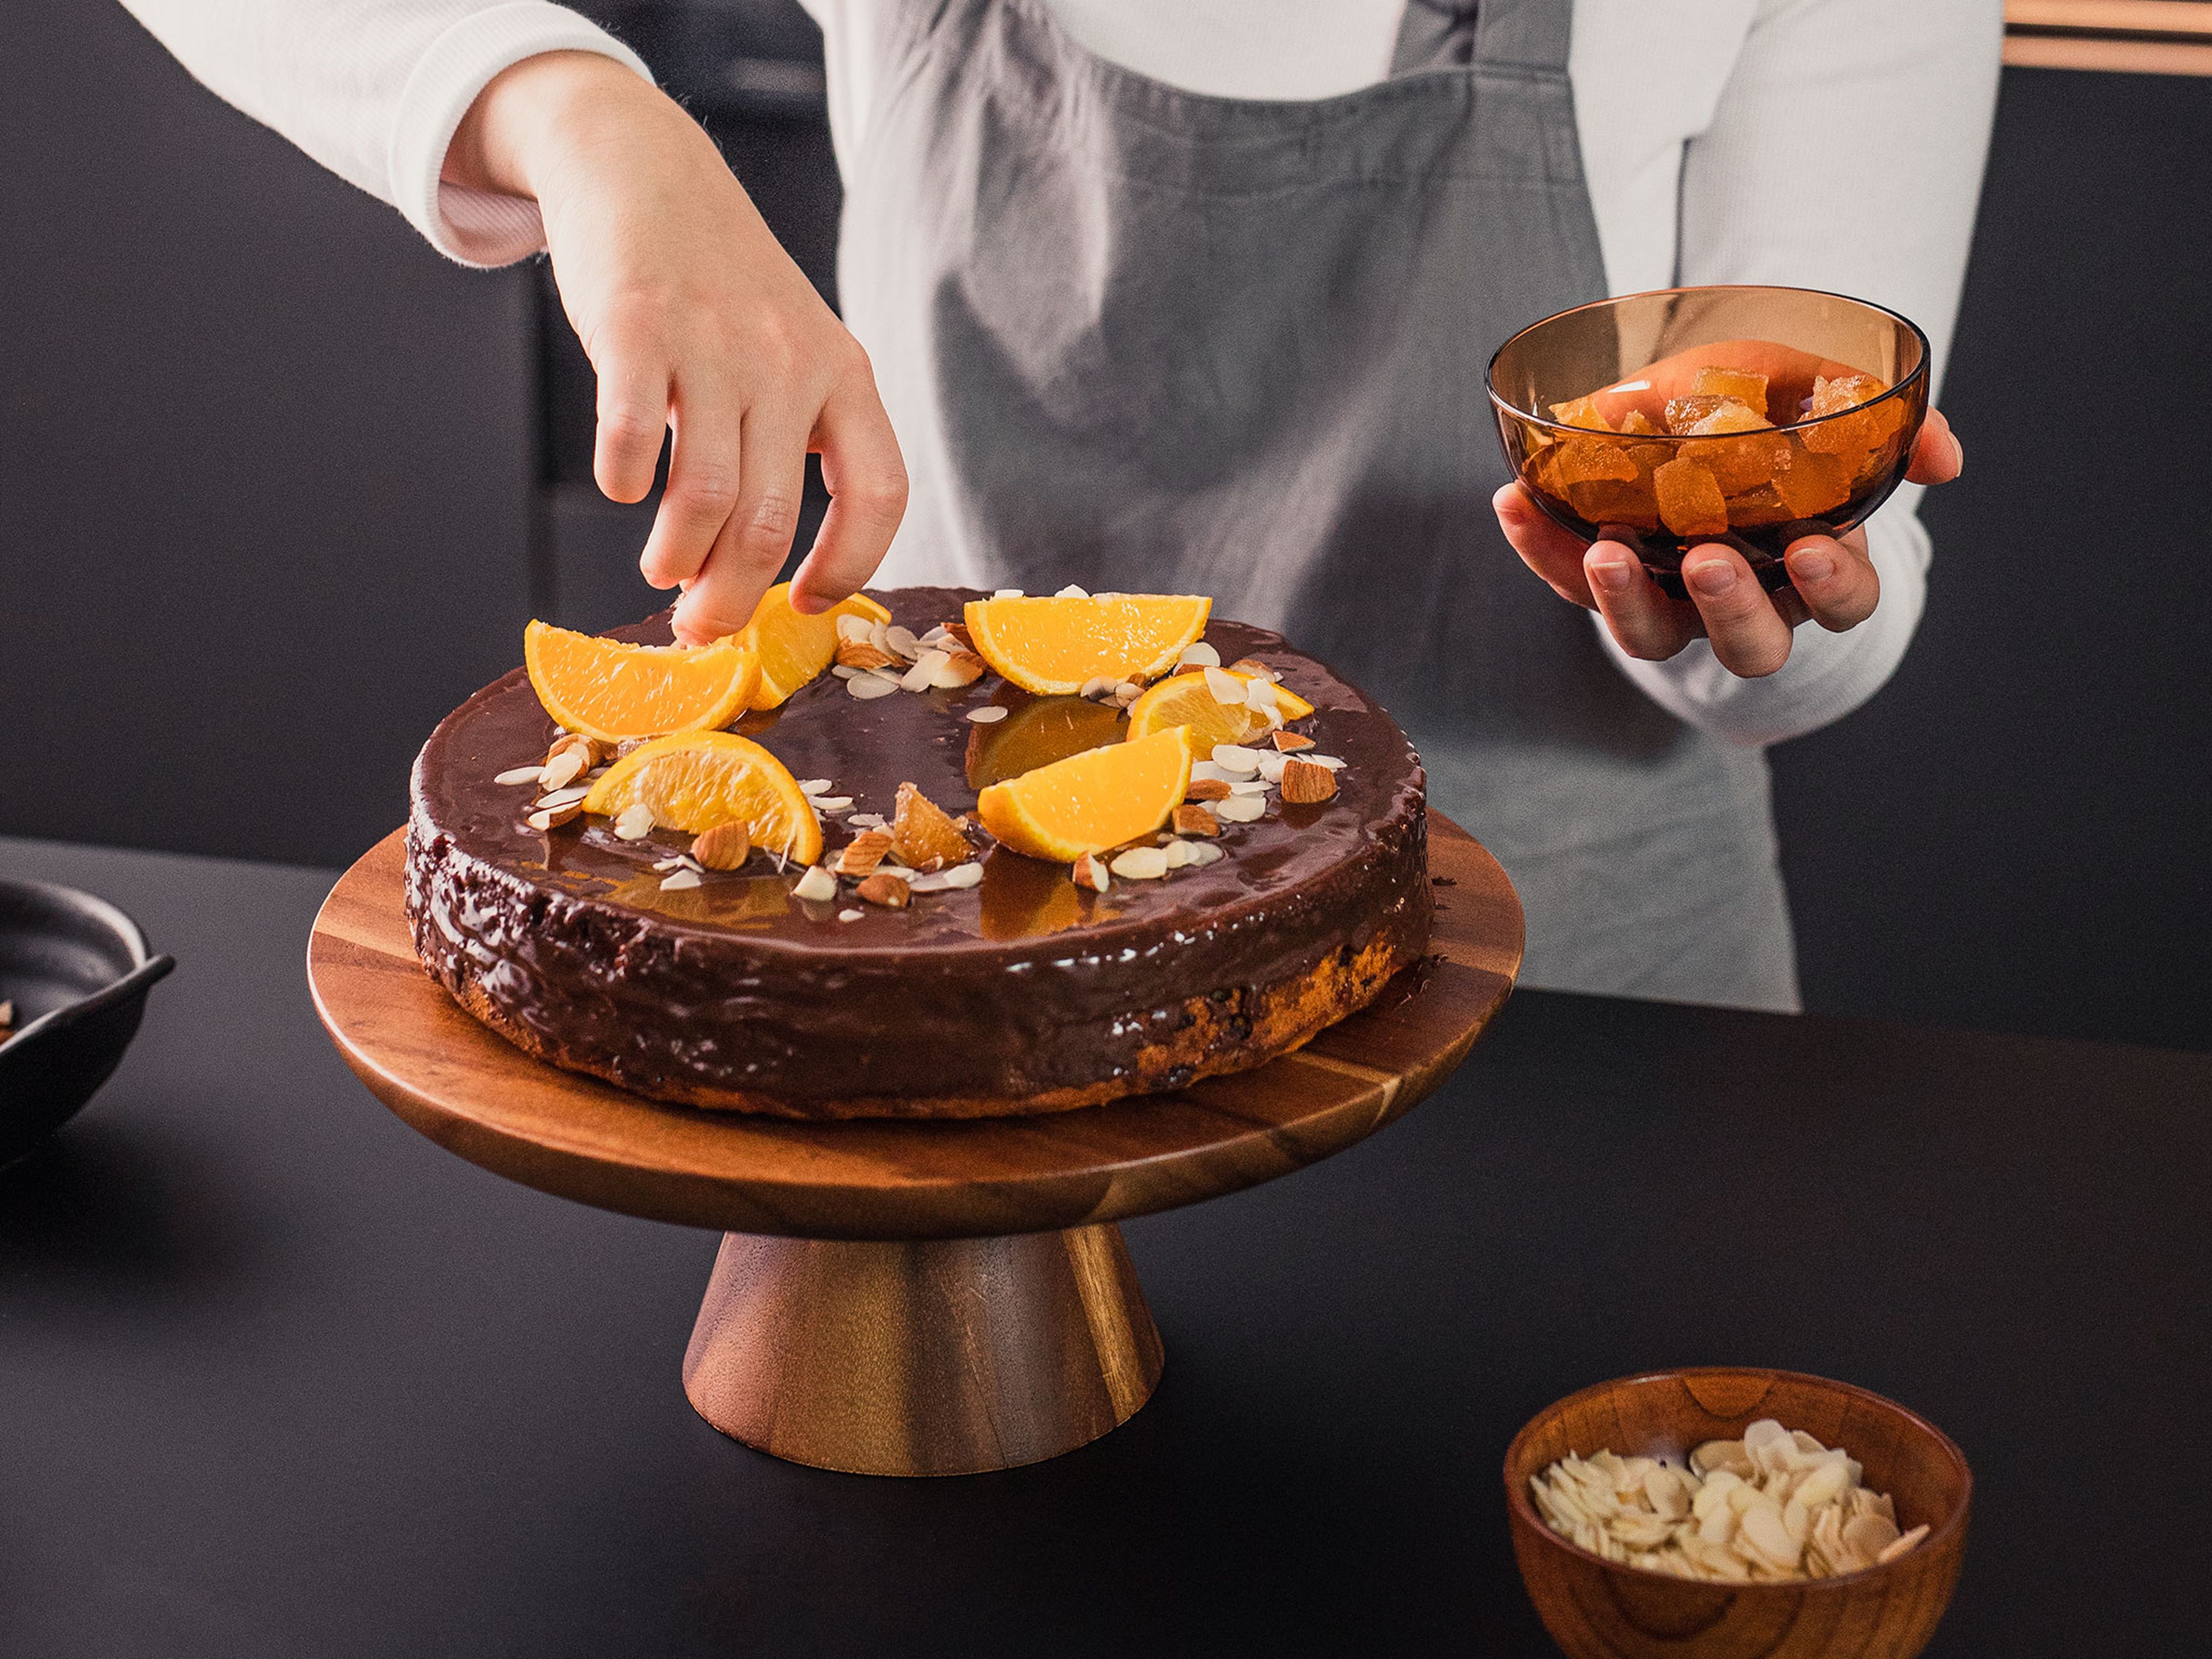 Spread some of the chocolate glaze on top, then add the other half of the cake. Cover with remaining chocolate glaze. Let chill for approx. 20 min. Slice the second orange and garnish cake with orange slices, sliced and chopped almonds, and candied ginger. Enjoy!